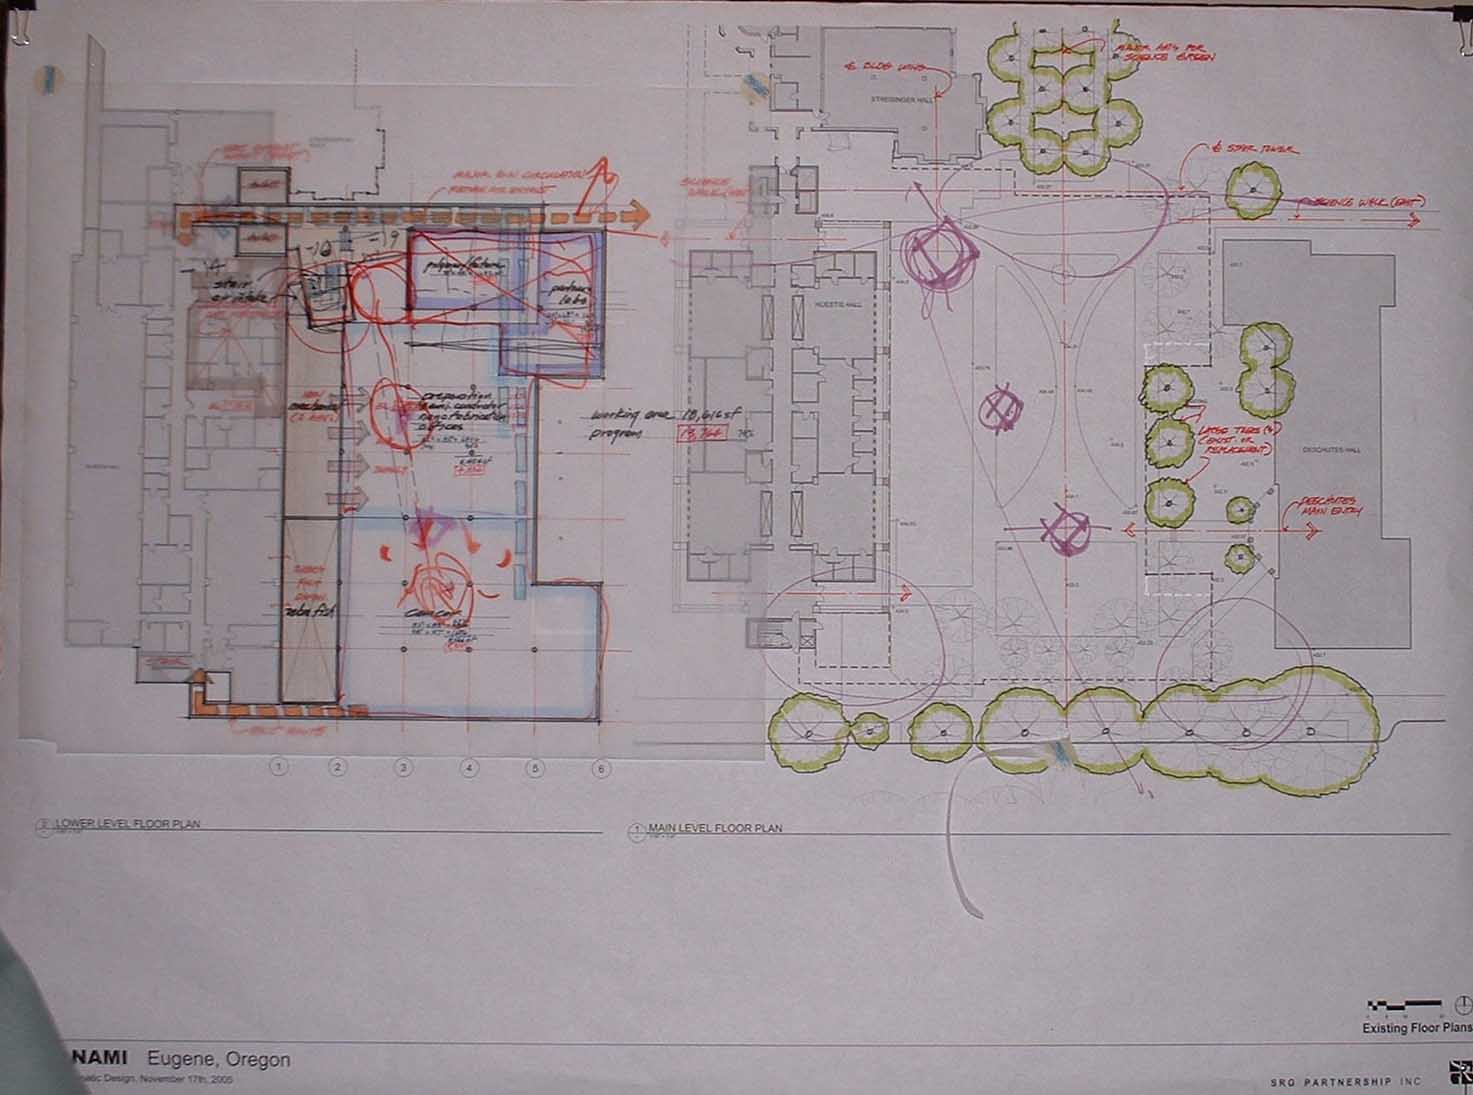 enlarged basement and site plan, ONAMI project, Nov 05